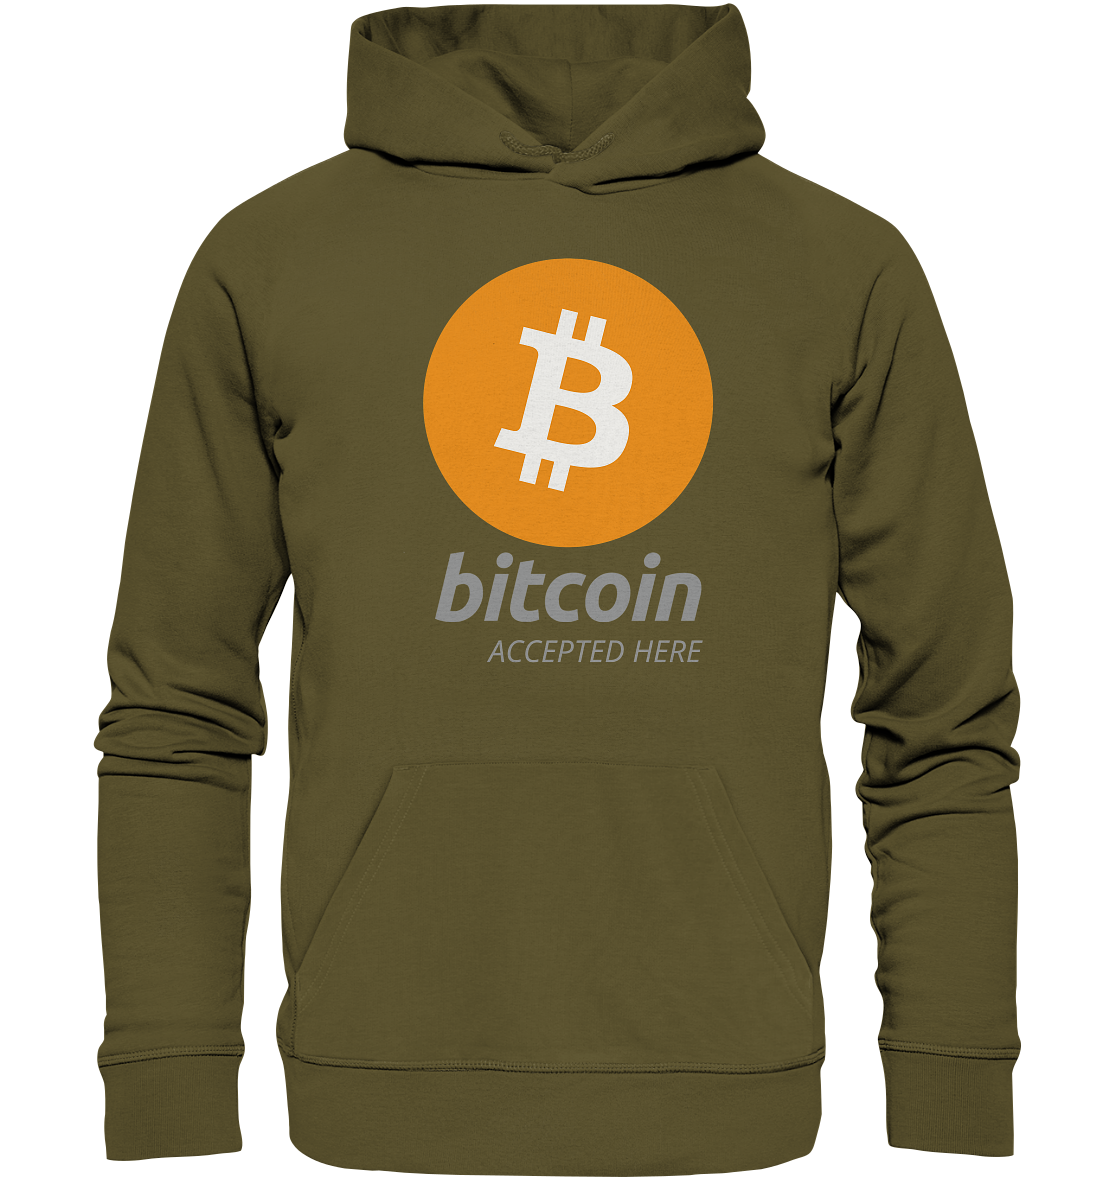 Bitcoin accepted here - Organic Hoodie